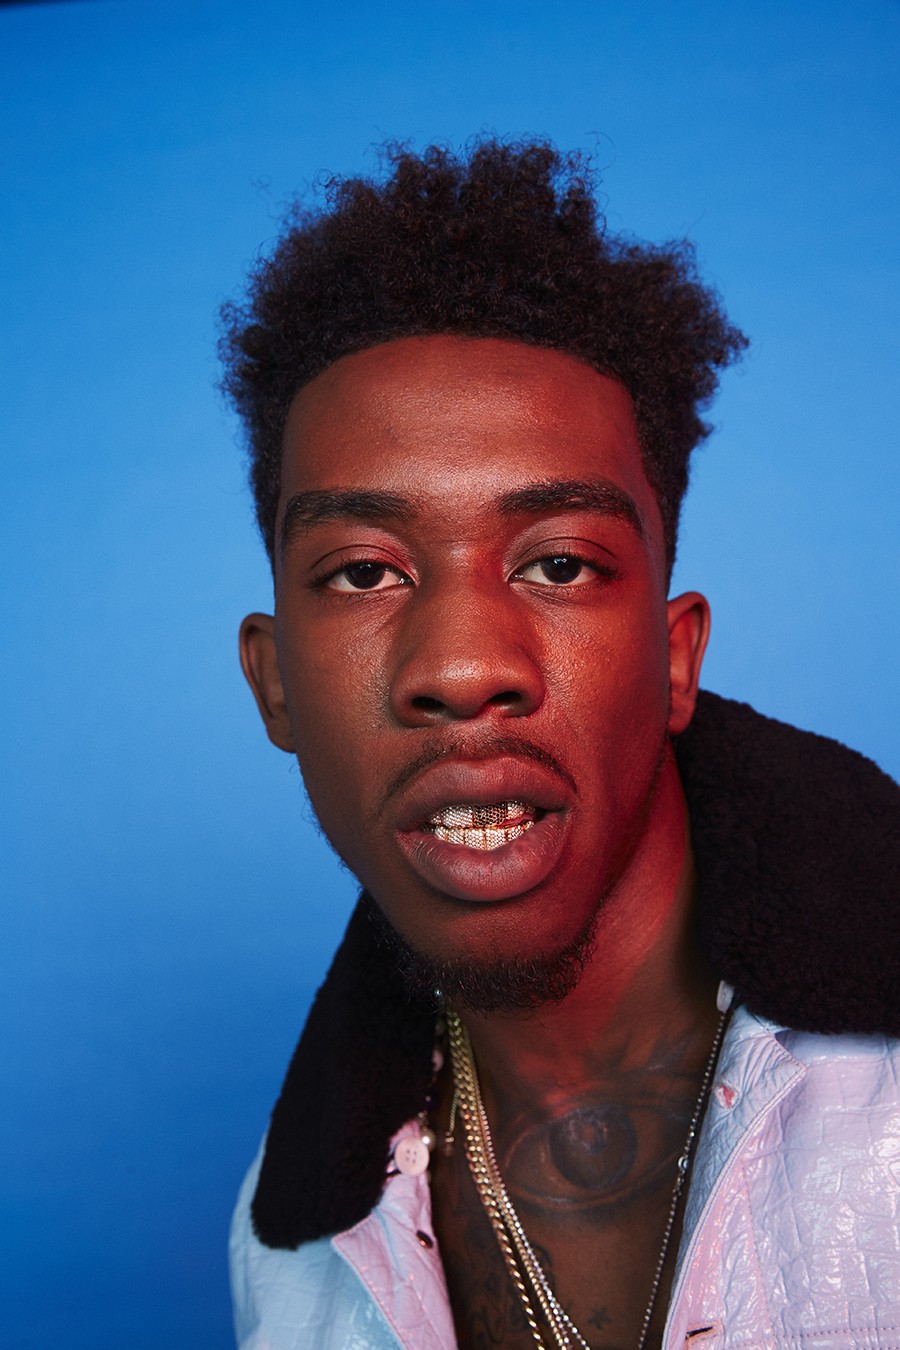 Desiigner Wants Fans to Feel Him - PAPER